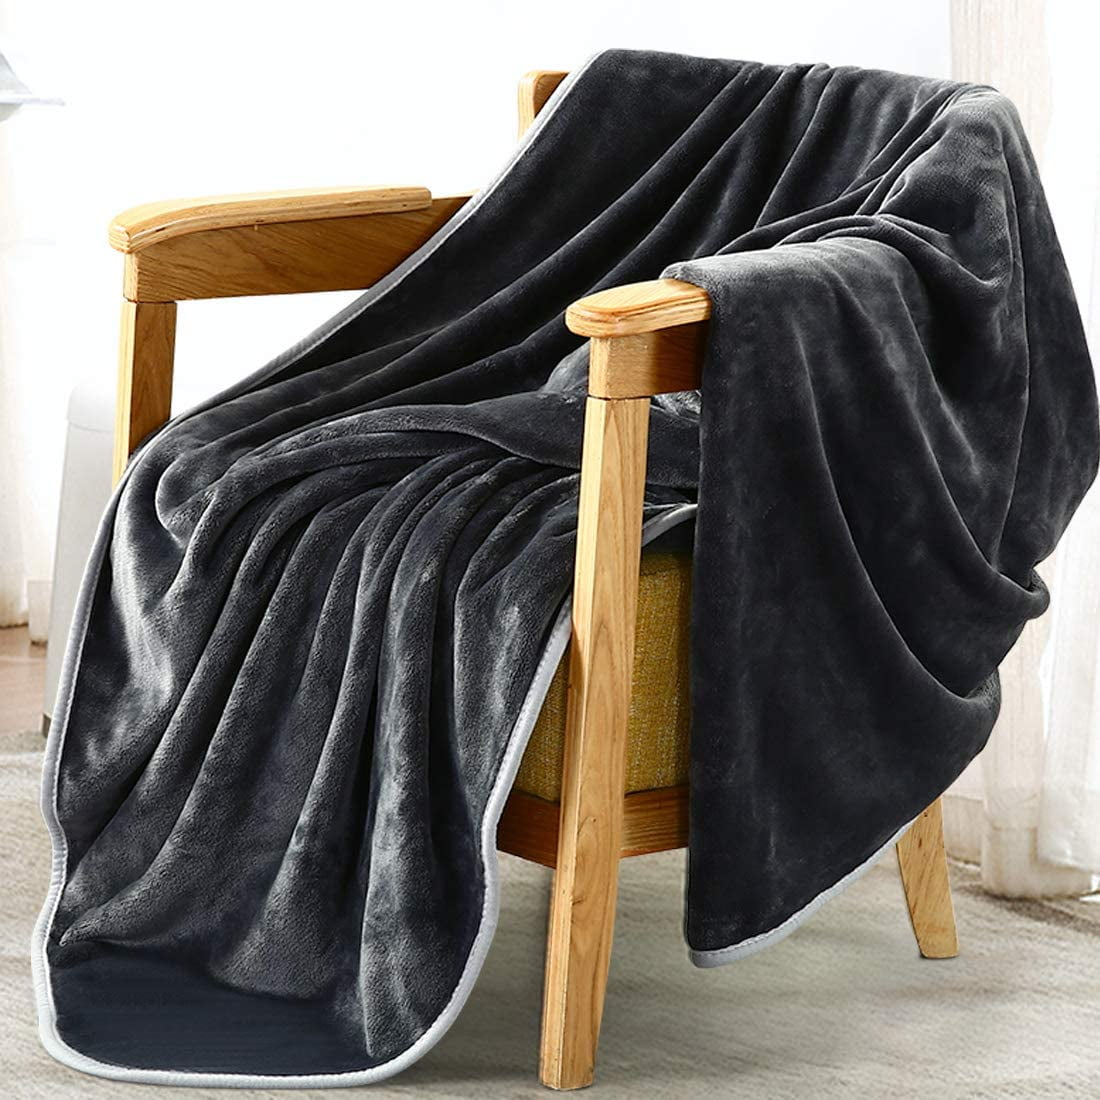 Gray,50 x 60 Wellbeing Fall Throw Blanket for Couch,Flannel Blankets & Throws,Soft Lightweight Grey Fuzzy Blanket for Bed,Sofa,Chair 